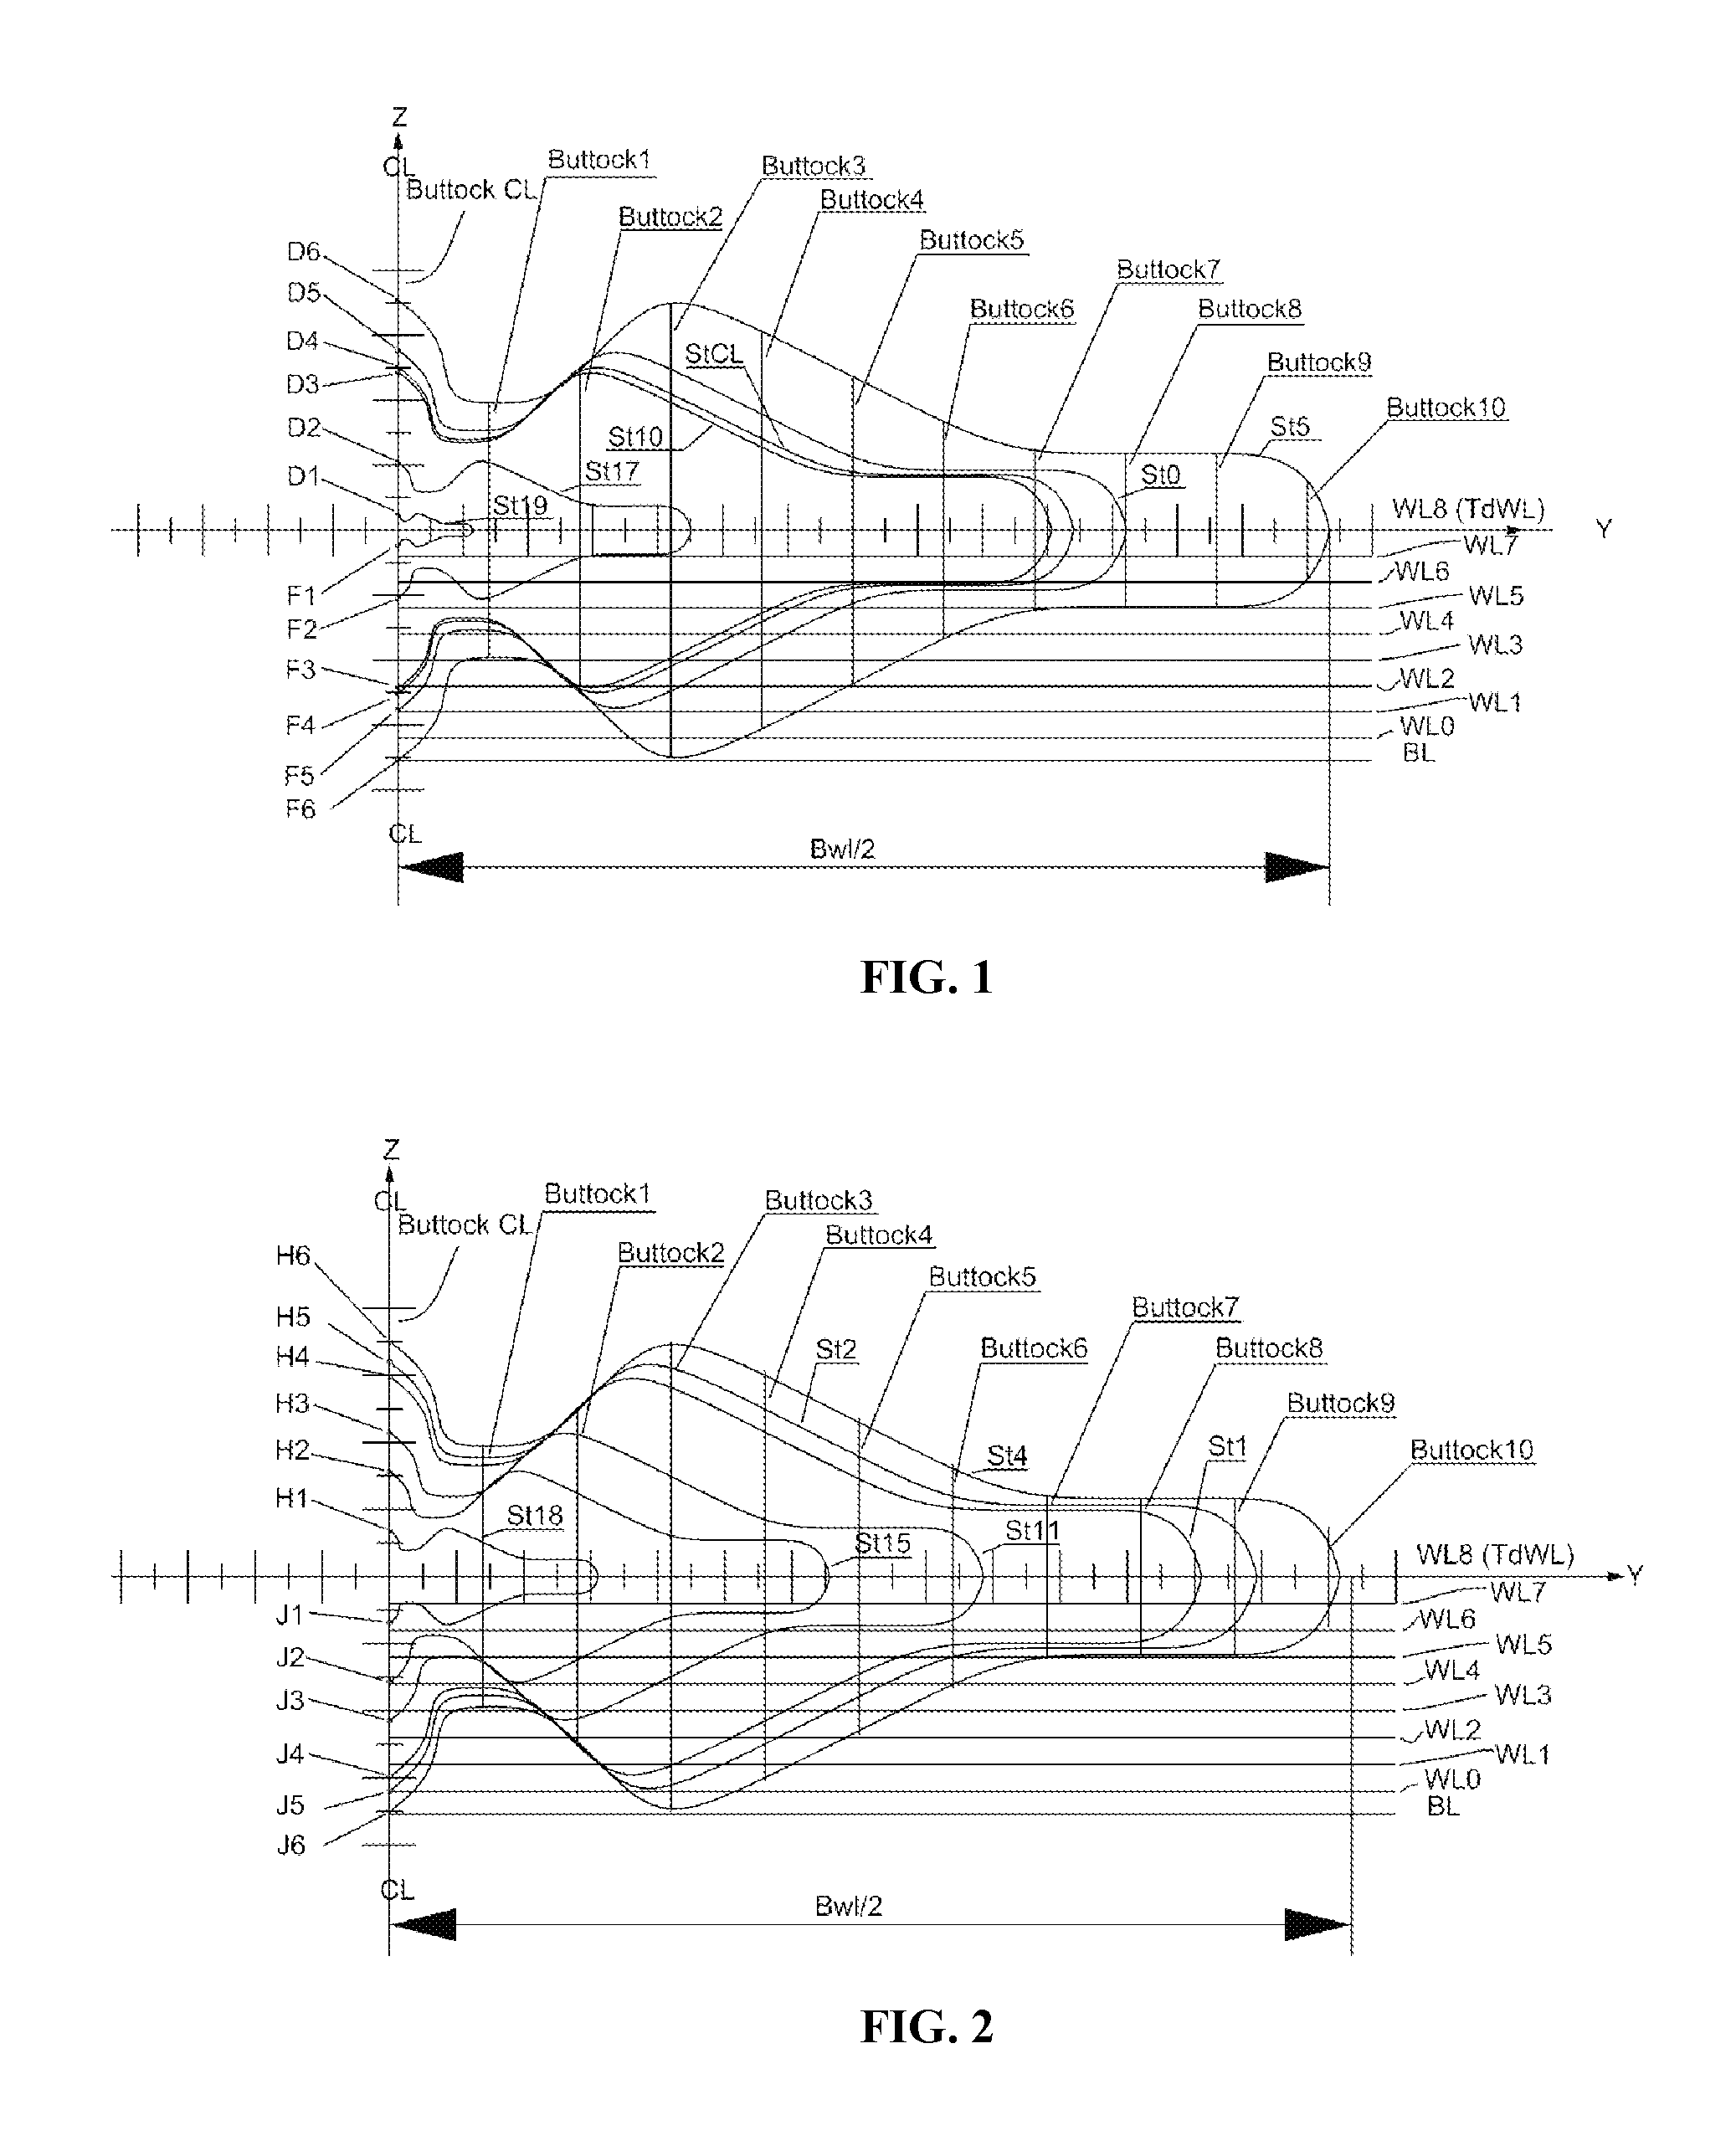 Hull configuration for submarines and vessel of the displacement type with multihull structure